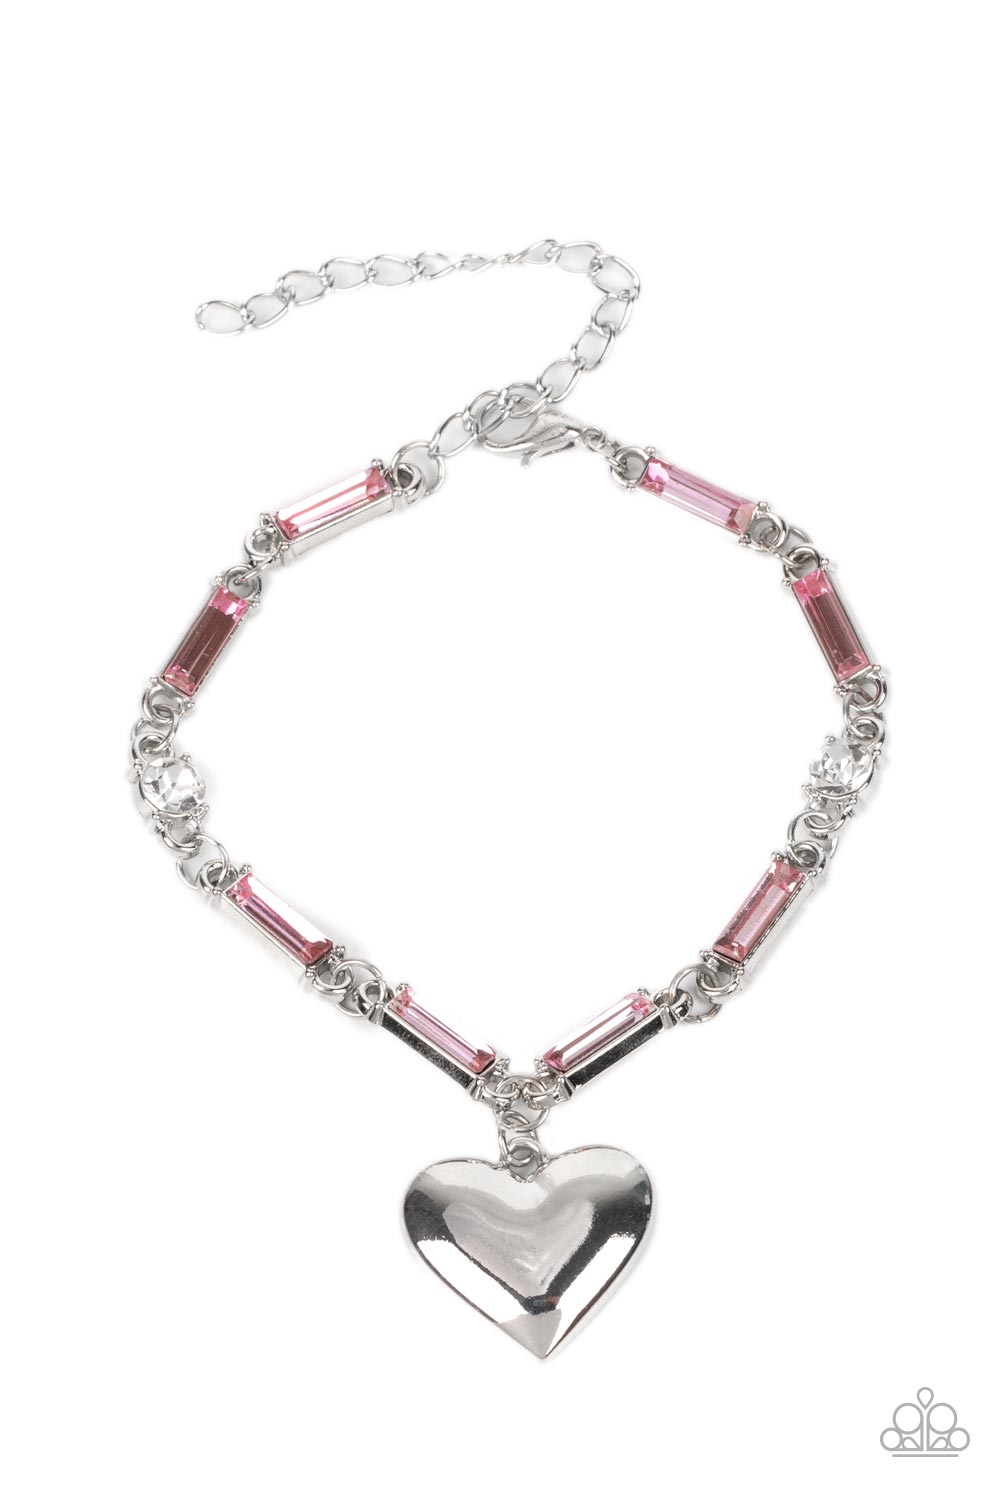 Sweetheart Secrets - Pink and Silver Heart  Bracelet - Paparazzi Accessories - Encased in sleek silver fittings, classic white rhinestones and emerald cut pink rhinestones delicately link into a sparkly chain around the wrist. A shiny silver heart charm swings from the glittery compilation, adding a flirtatious shimmer. Features an adjustable clasp closure. Sold as one individual bracelet. Trendy fashion jewelry for everyone -